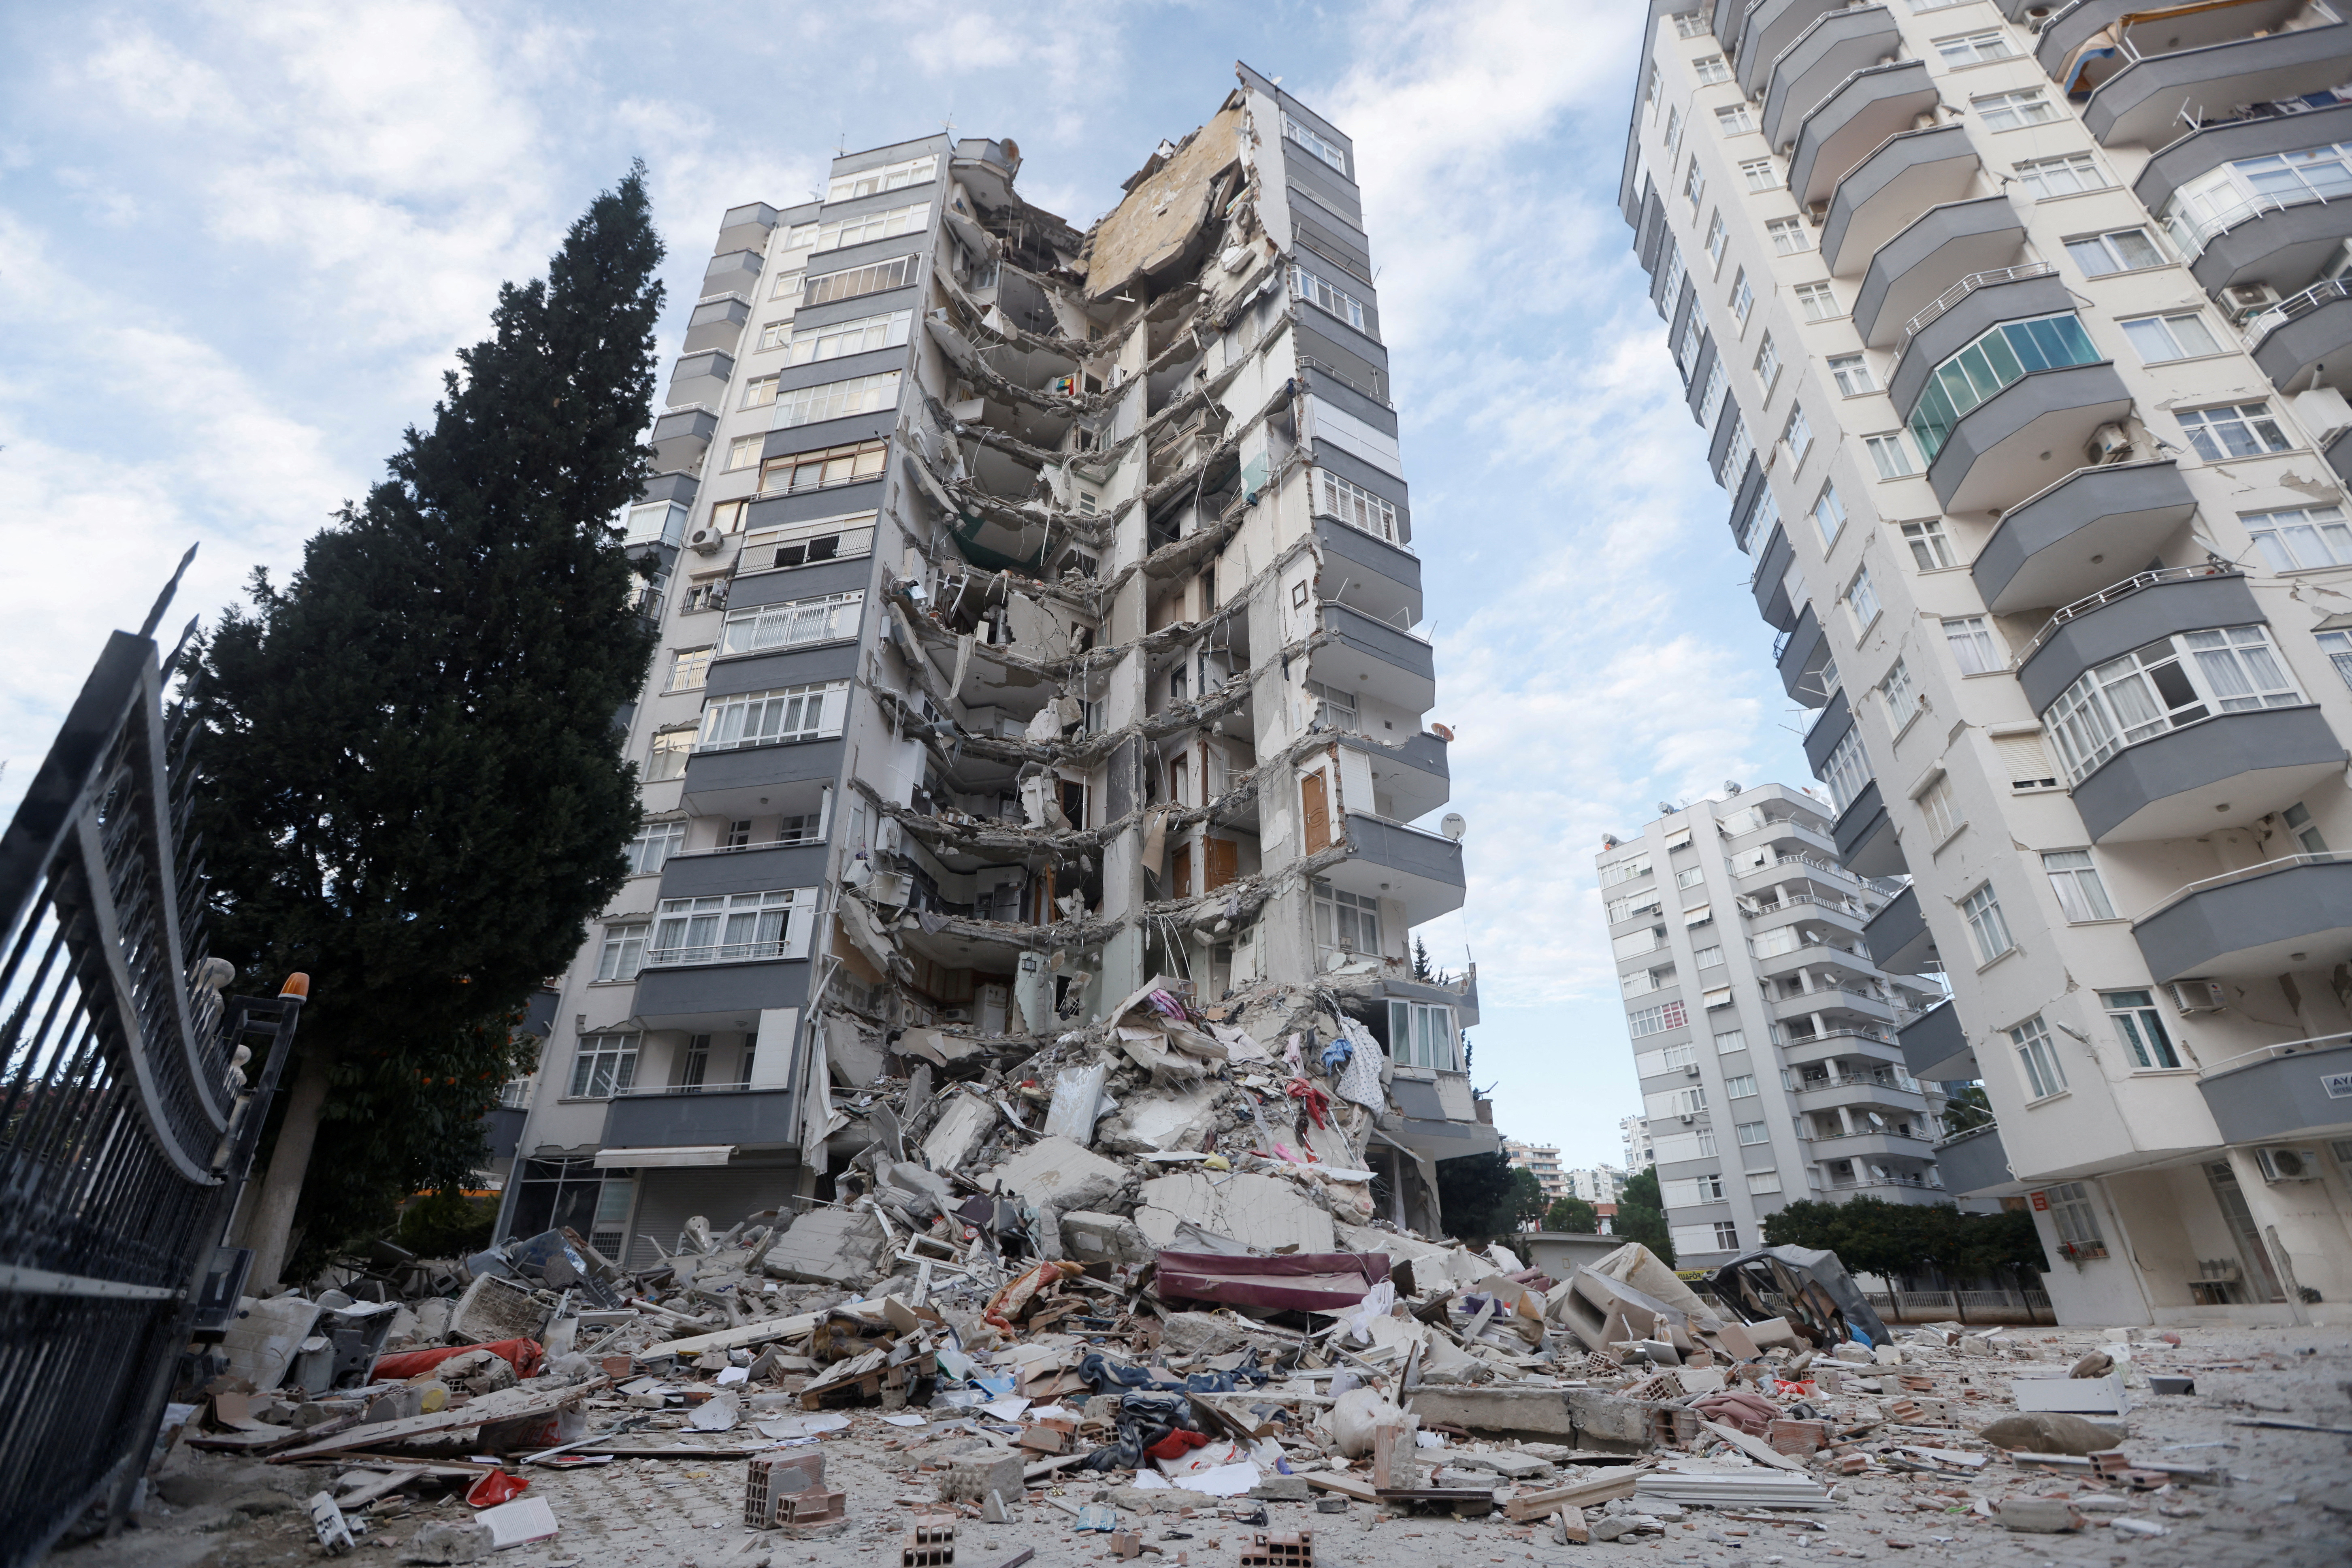 Aftermath of the deadly earthquake in Adana